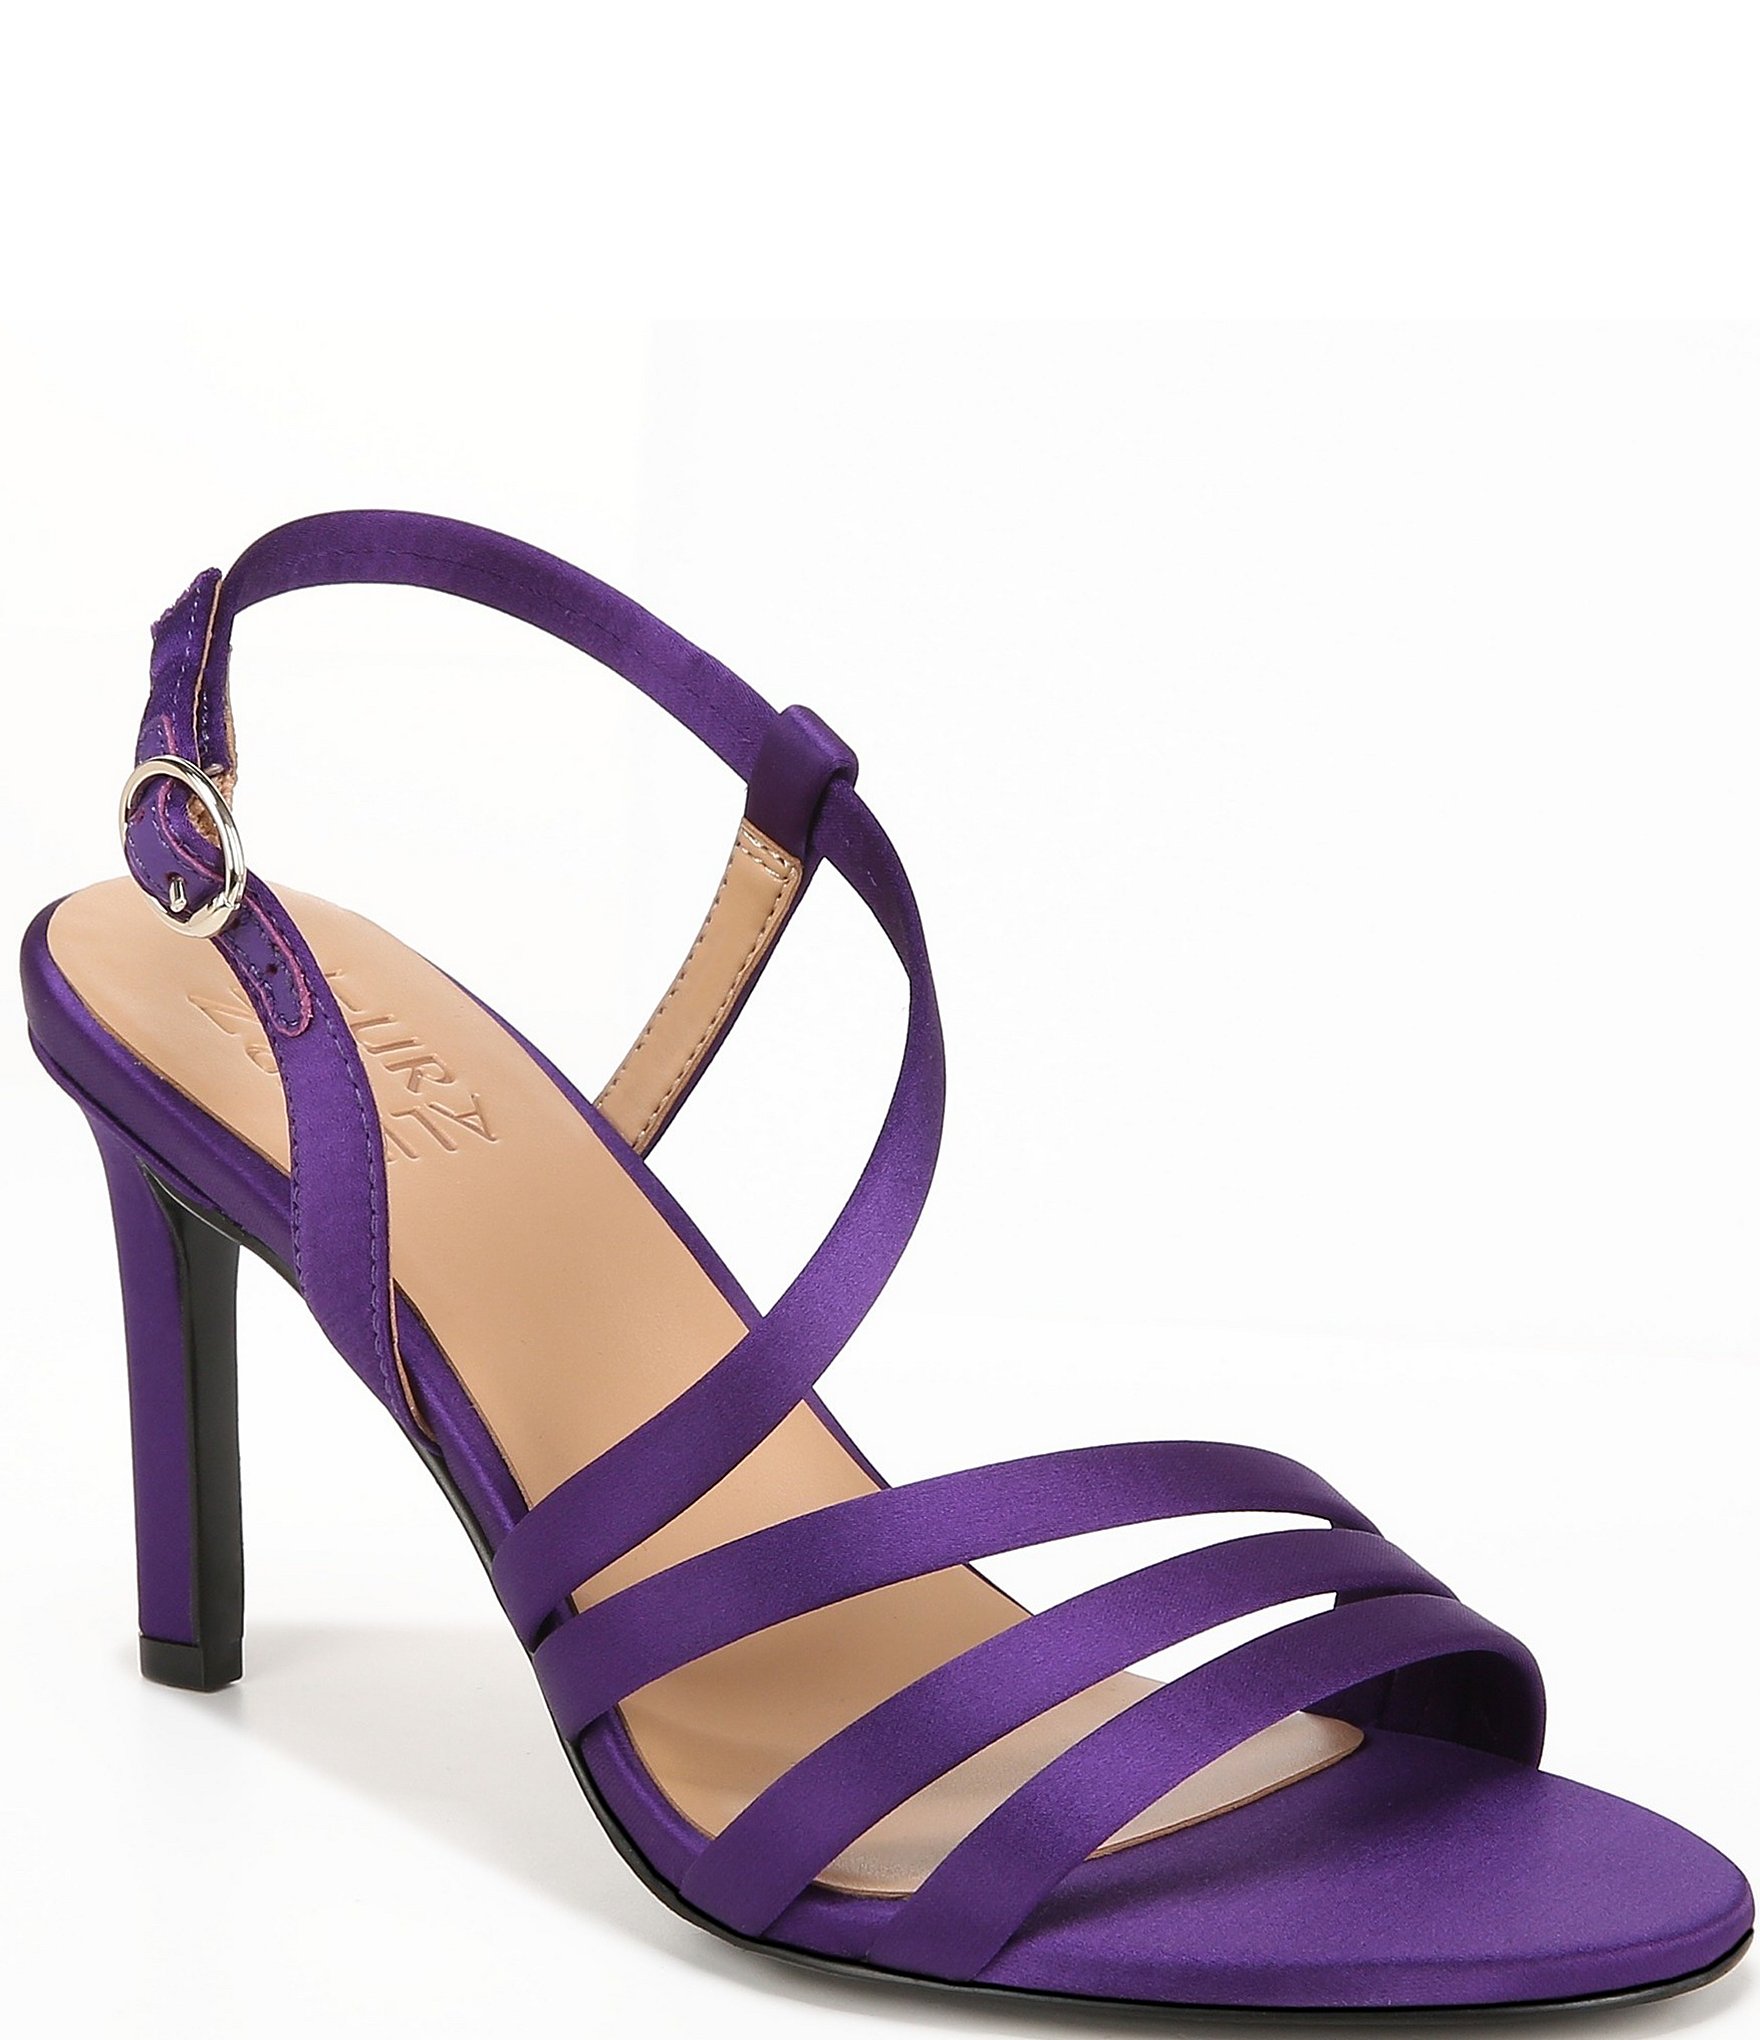 strappy sandals: Women's Comfort Shoes